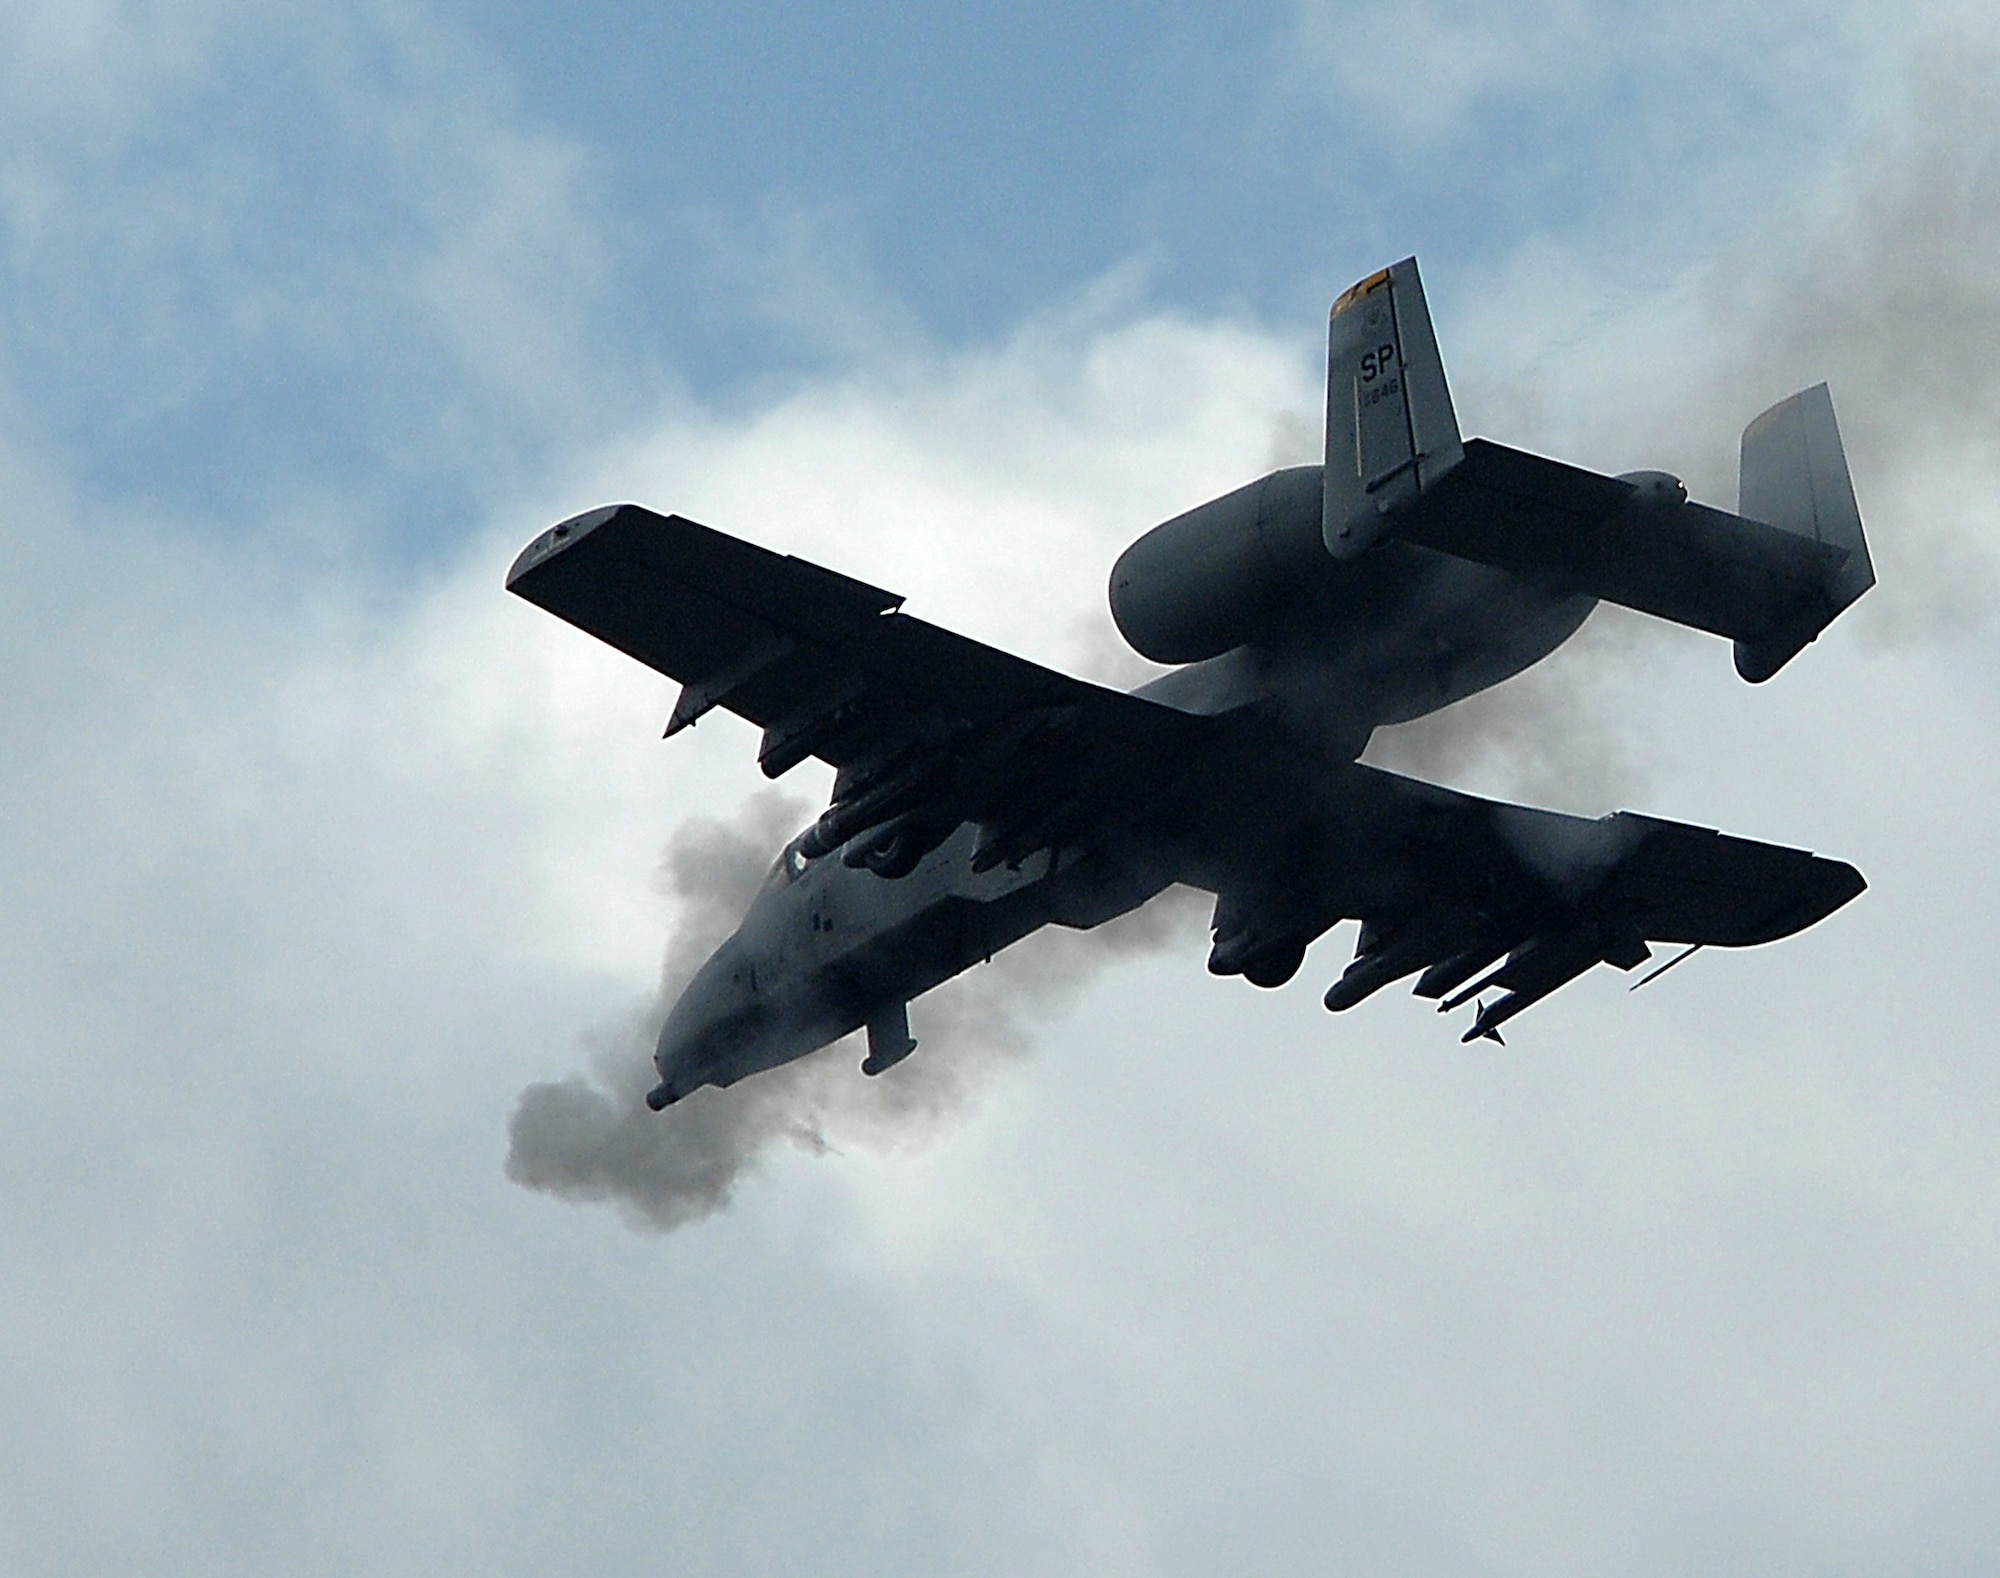 An A-10 Thunderbolt II from the 81st Fighter Squadron at Spangdahlem Air Base, Germany, fires ammunition during a training mission over Novo Selo Training Range, Bulgaria. The A-10s were used to support a joint training exercise between the U.S. and Bulgarian air forces. (U.S. Air Force photo/Master Sgt. Bill Gomez) 
